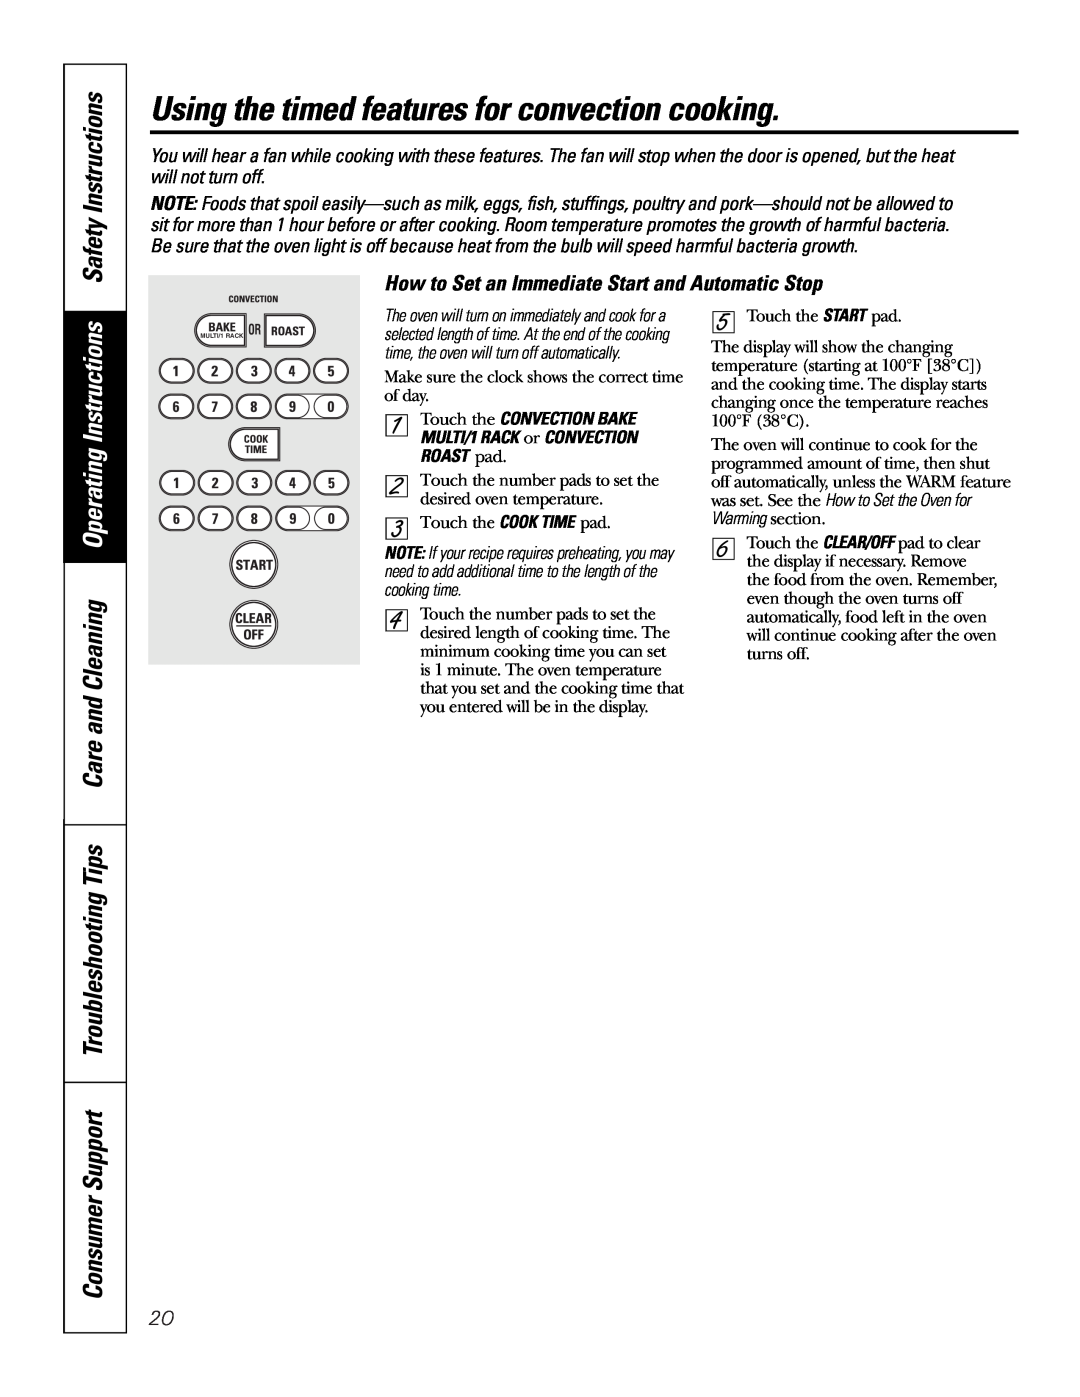 GE PGS968 owner manual Using the timed features for convection cooking, How to Set an Immediate Start and Automatic Stop 